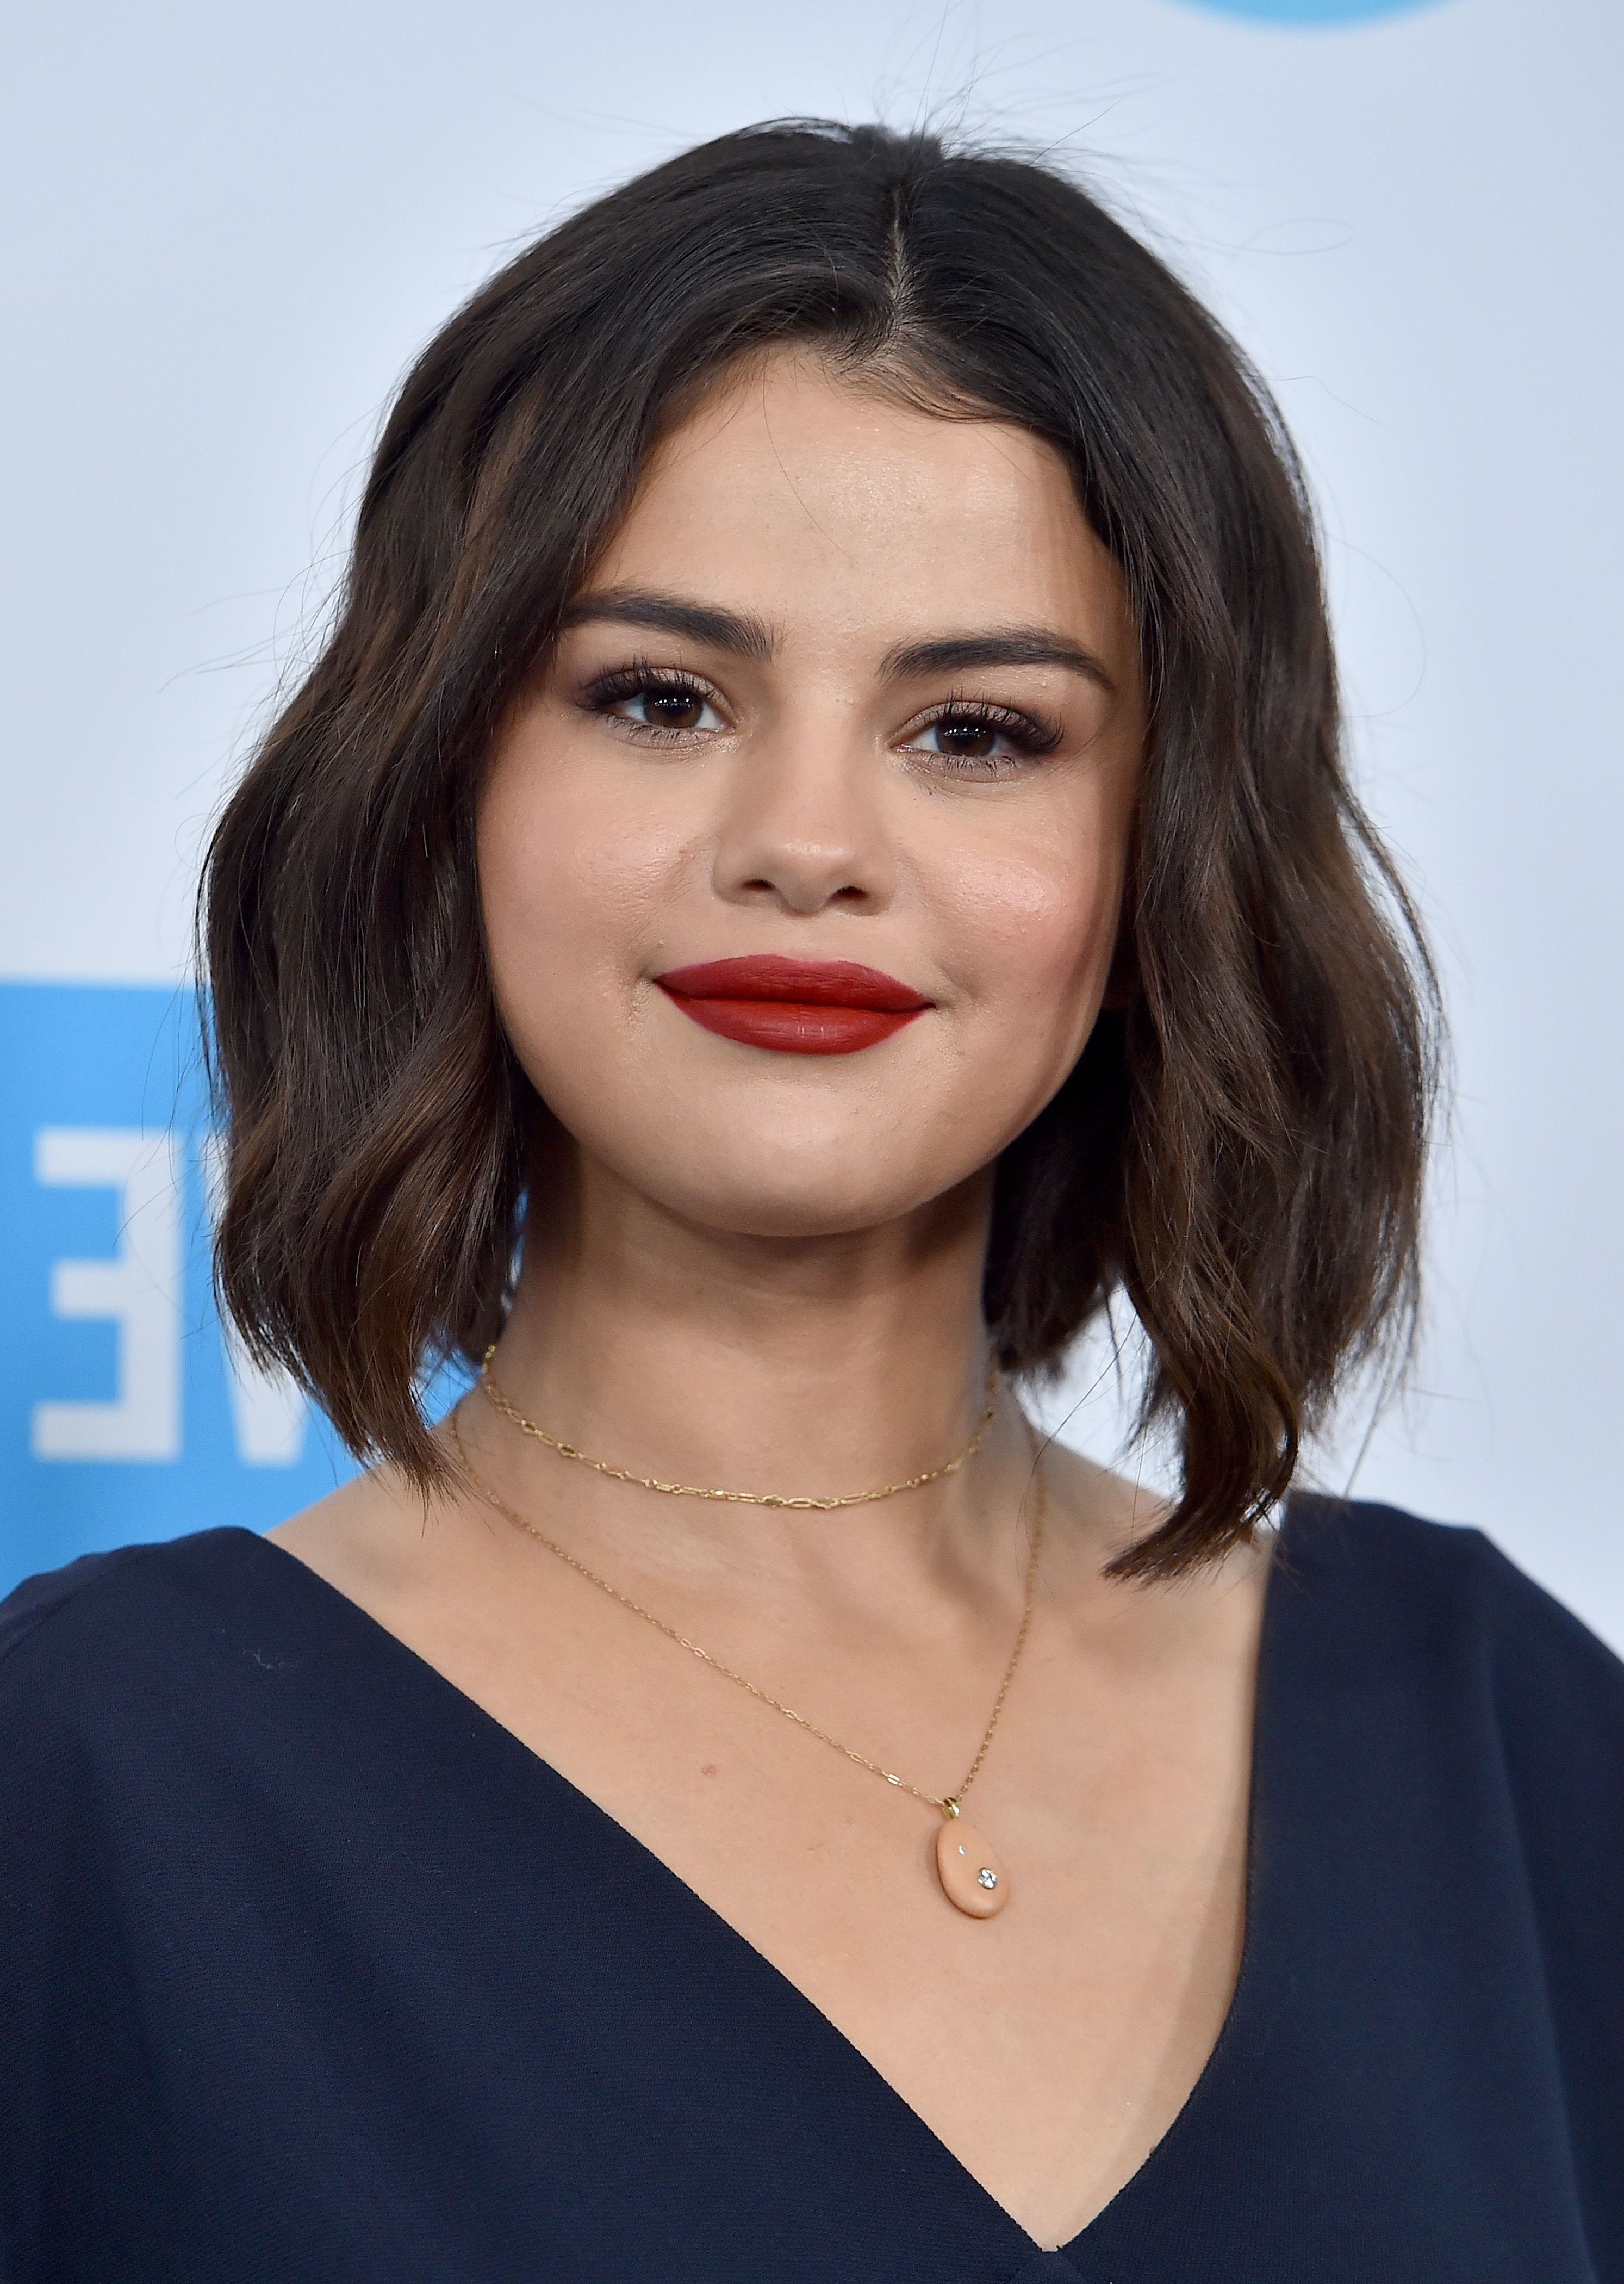 30+ Best Selena Gomez Hairstyles, From Short Hair And Shaved To Bangs Within Selena Gomez Short Hairstyles (Photo 3 of 25)